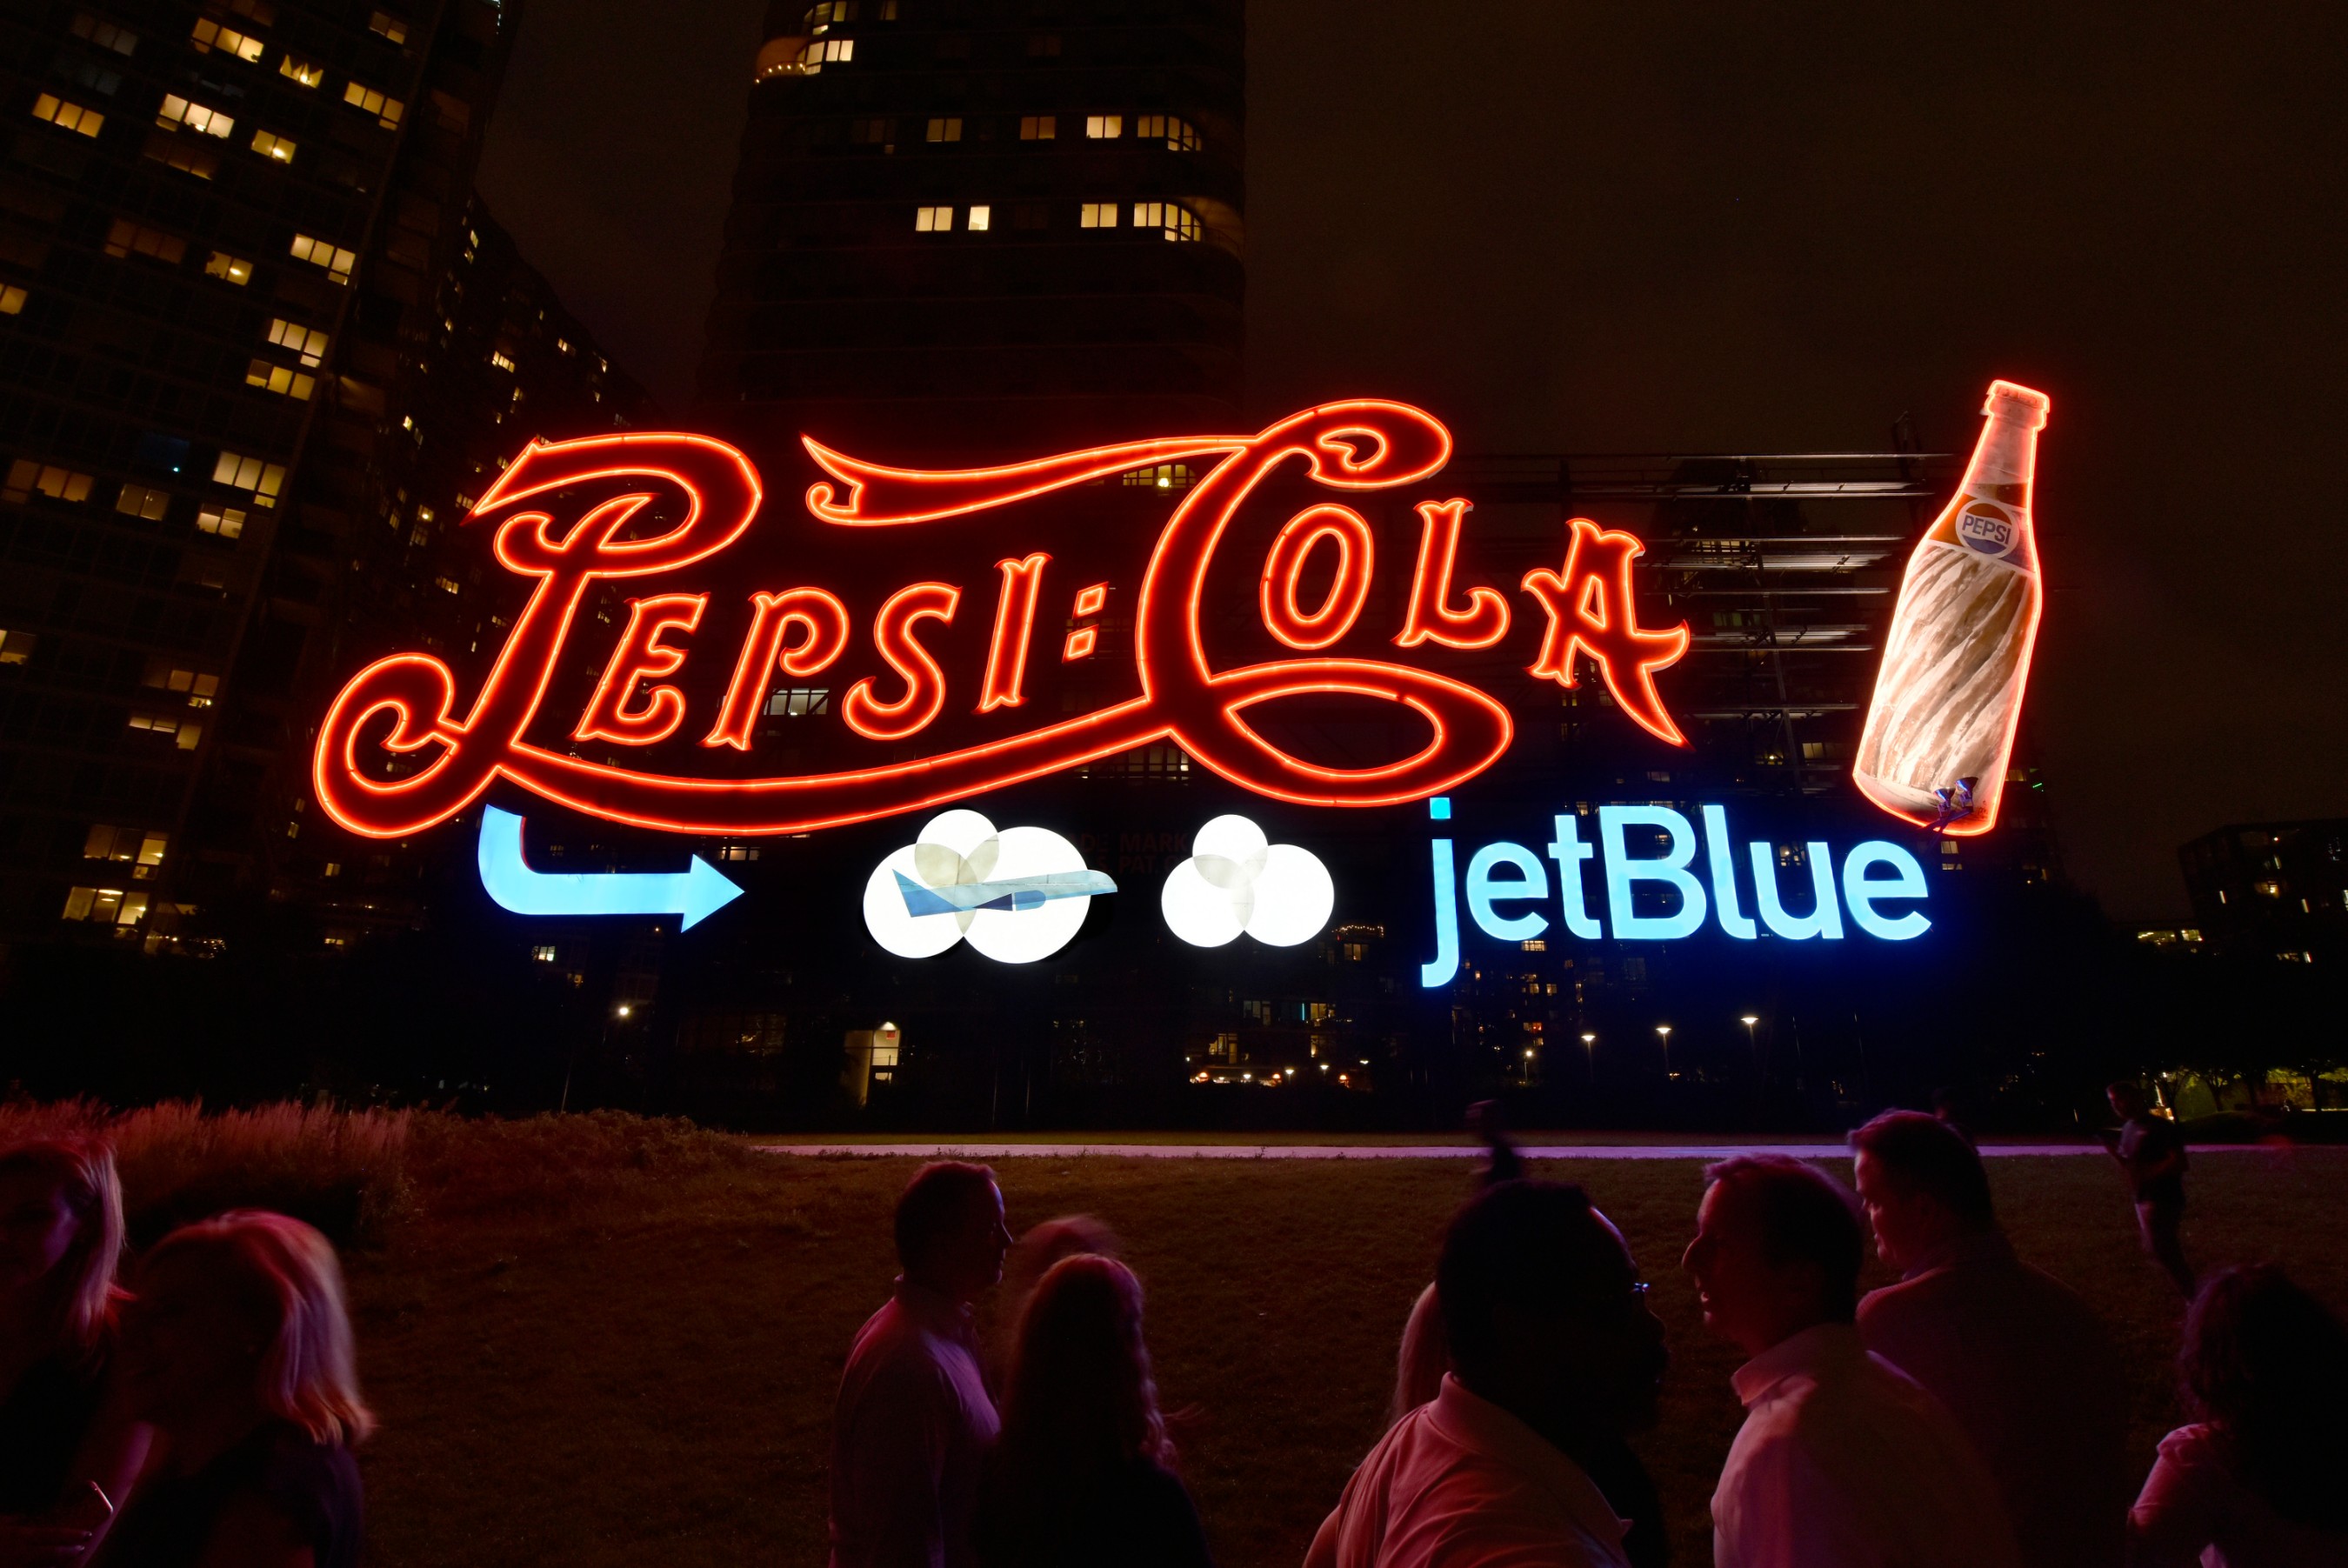 PepsiCo and JetBlue light up the sky in Long Island City, New York in celebration of the new partnership between these two New York-based companies. For the first time ever, PepsiCo temporarily added JetBlue branding to its world-famous Pepsi-Cola sign, which will be visible to New Yorkers and visitors through September.